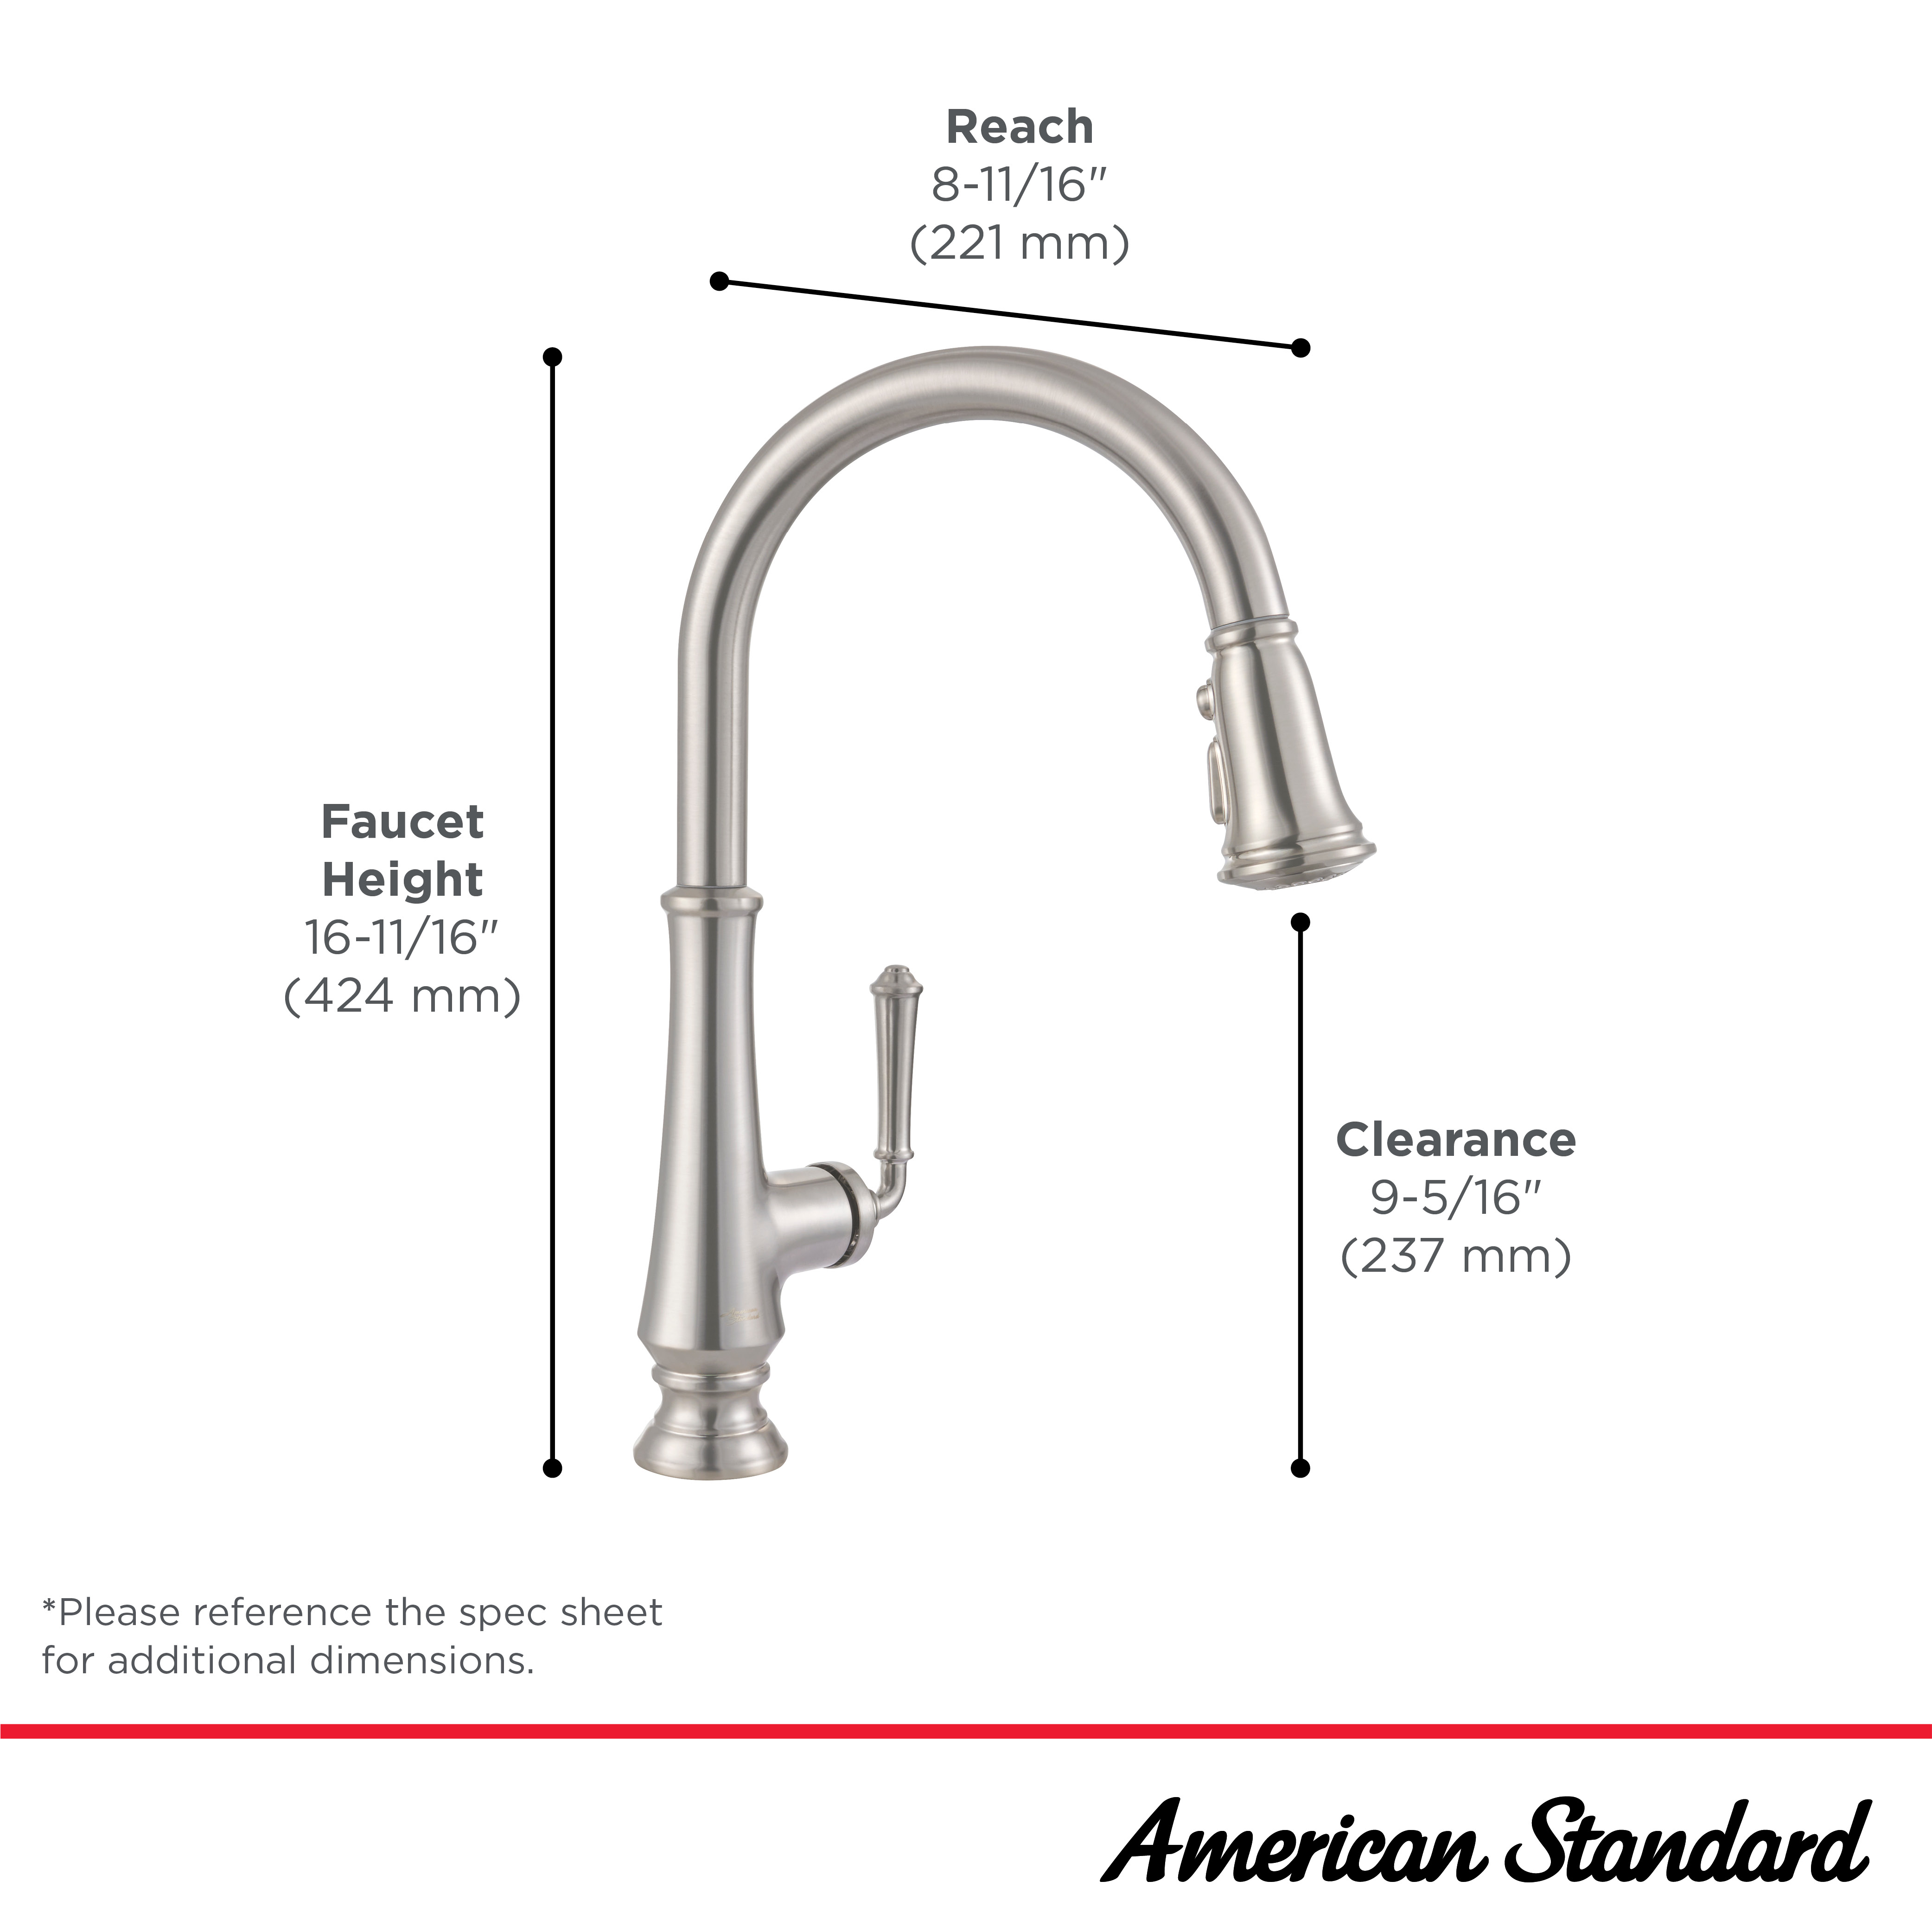 Delancey™ Single-Handle Pull-Down Dual Spray Function Kitchen Faucet 1.5 gpm/5.7 L/min